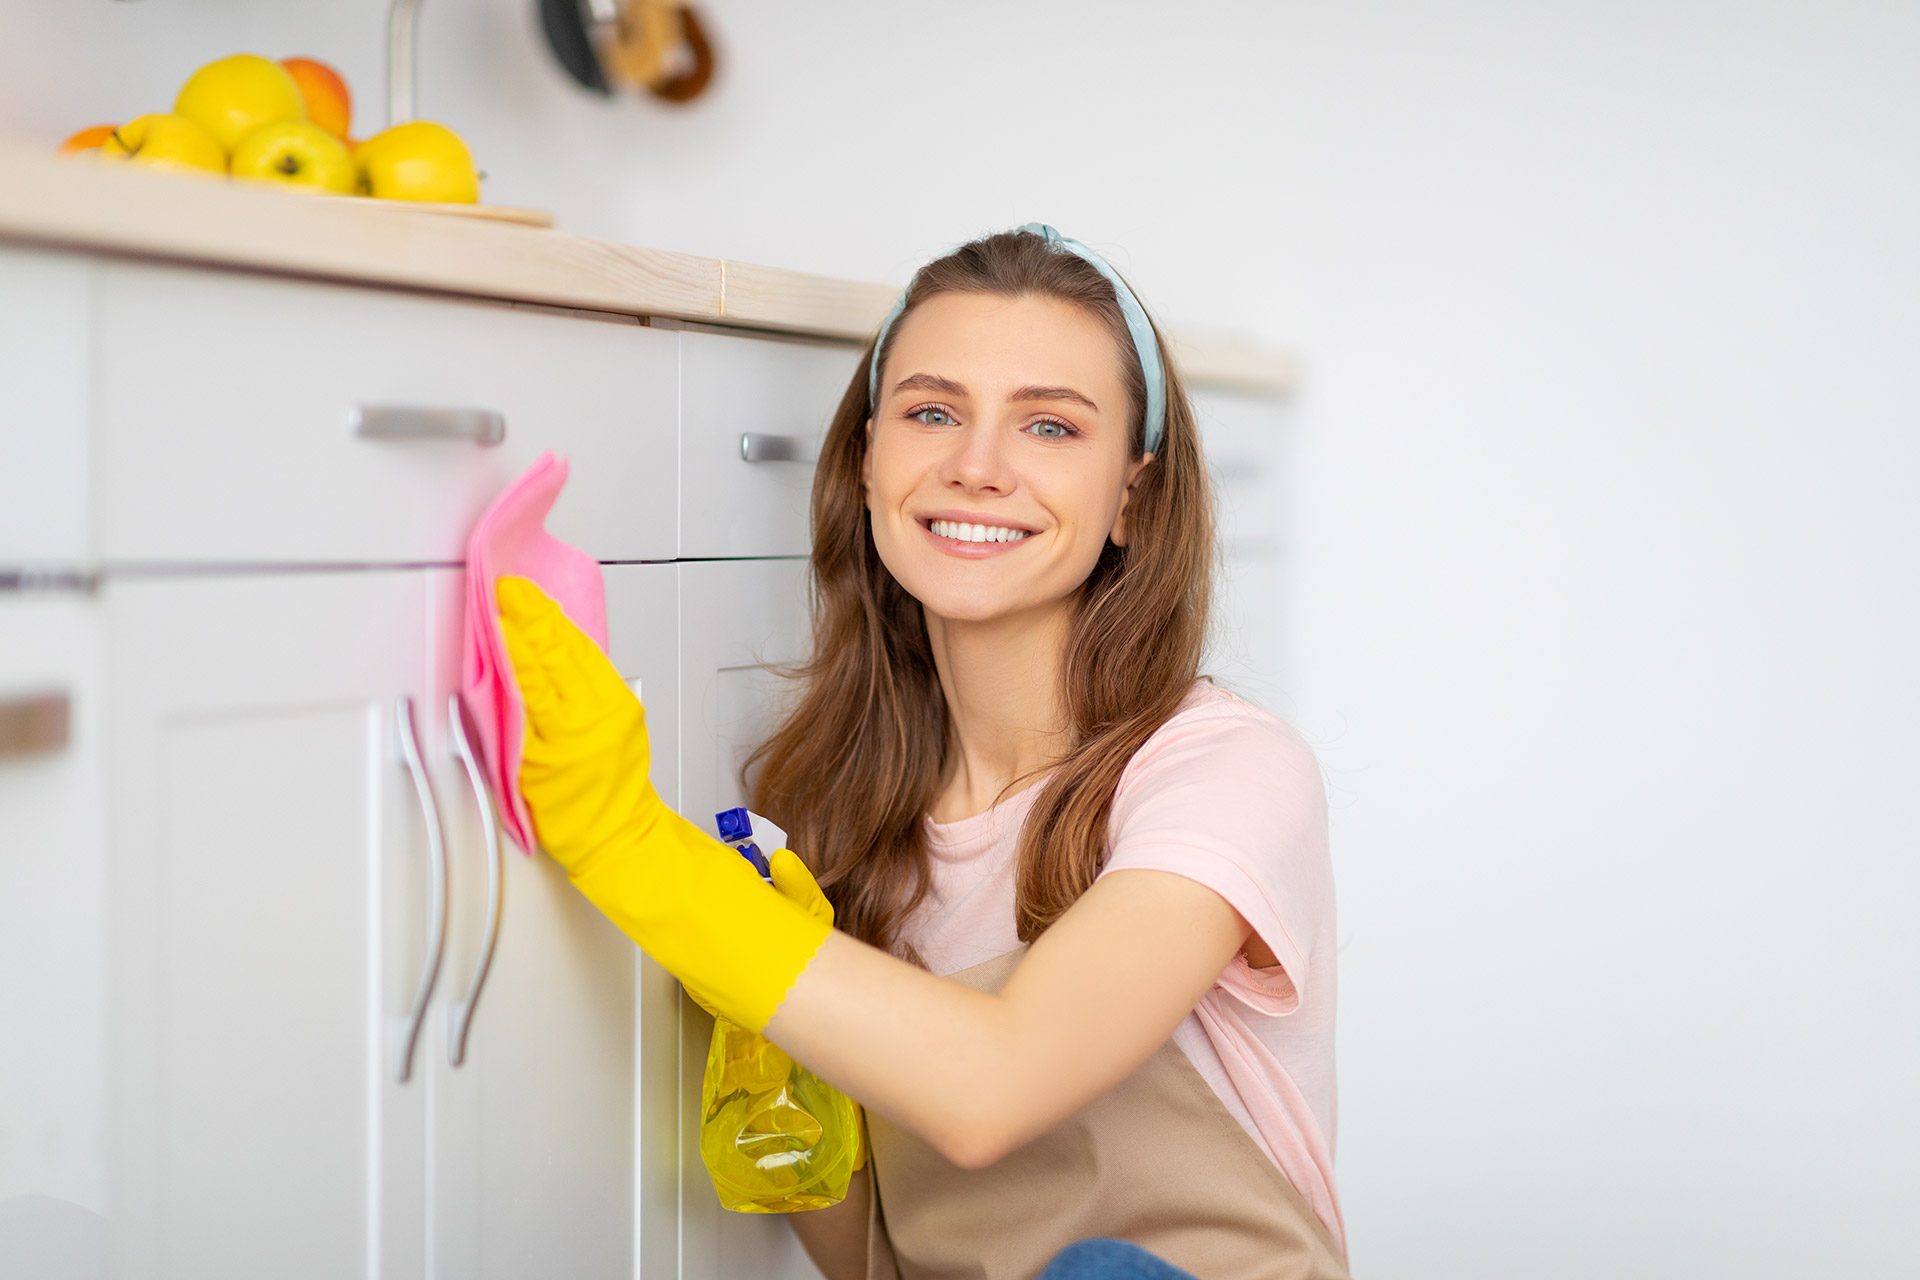 positive-young-lady-washing-kitchen-cabinet-with-d-2021-09-02-05-06-11-utc.jpg